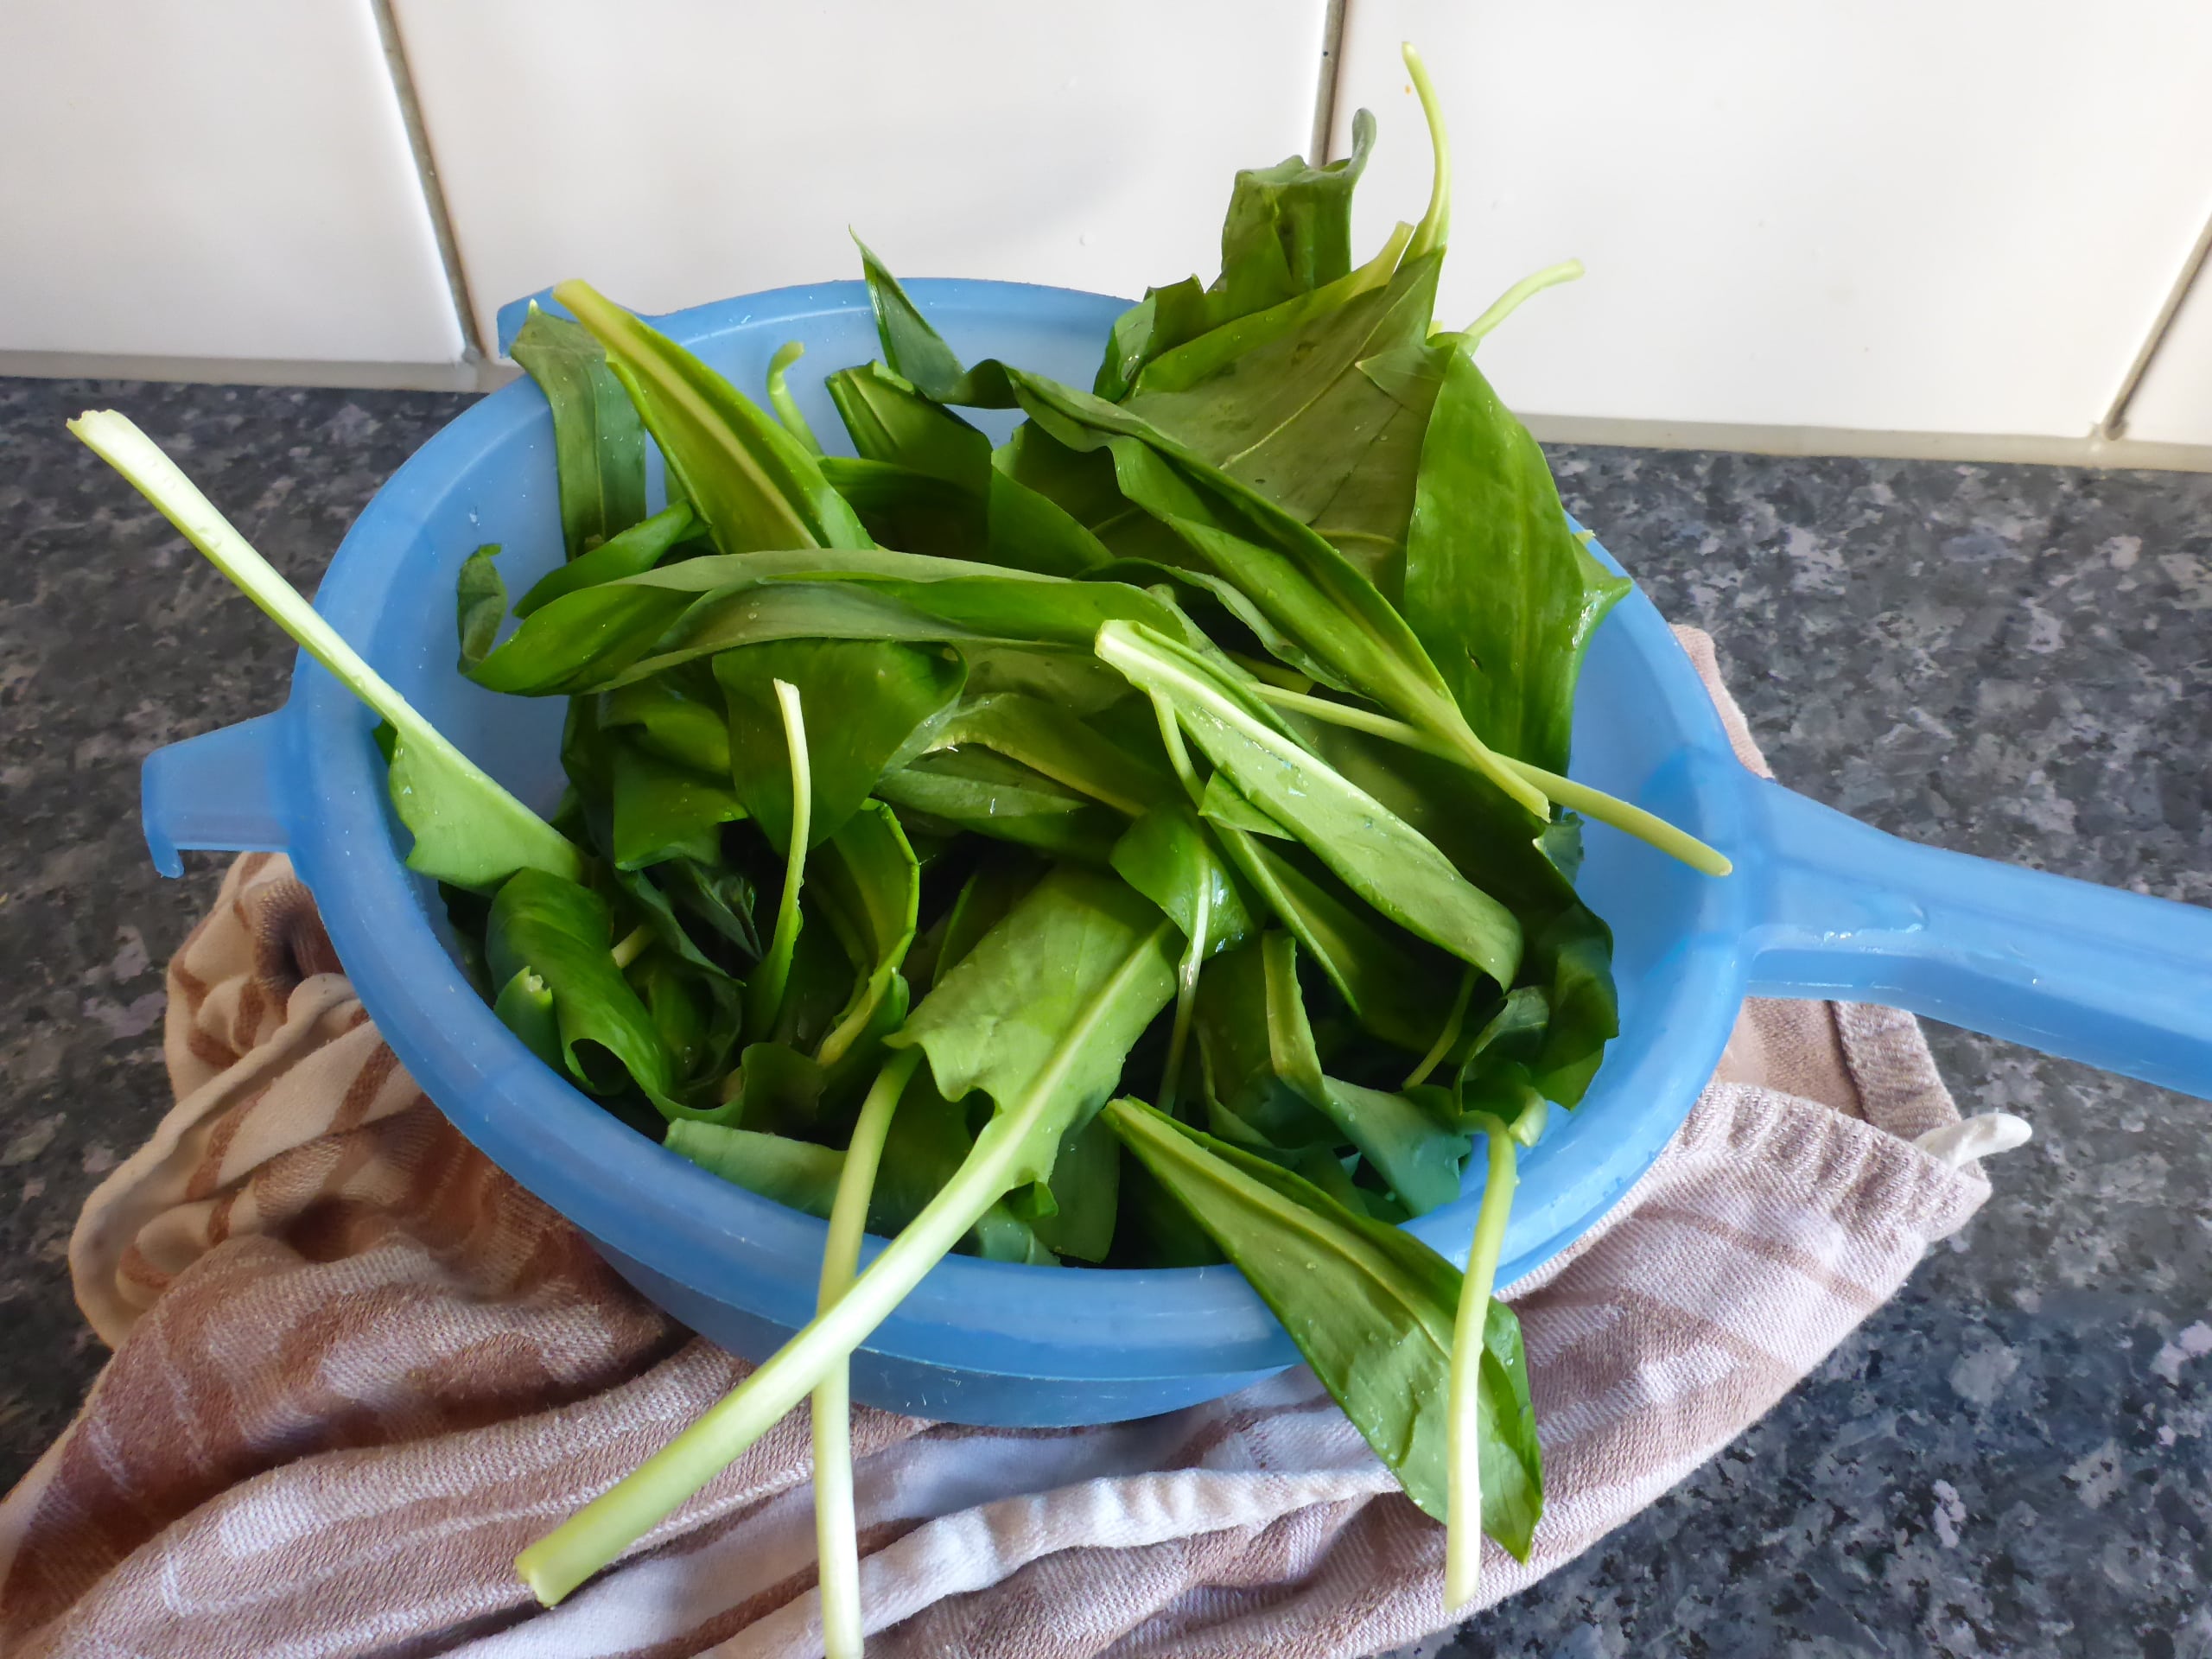 Freshly Washed Wild Garlic Leaves in a Colander, Awaiting Drying.